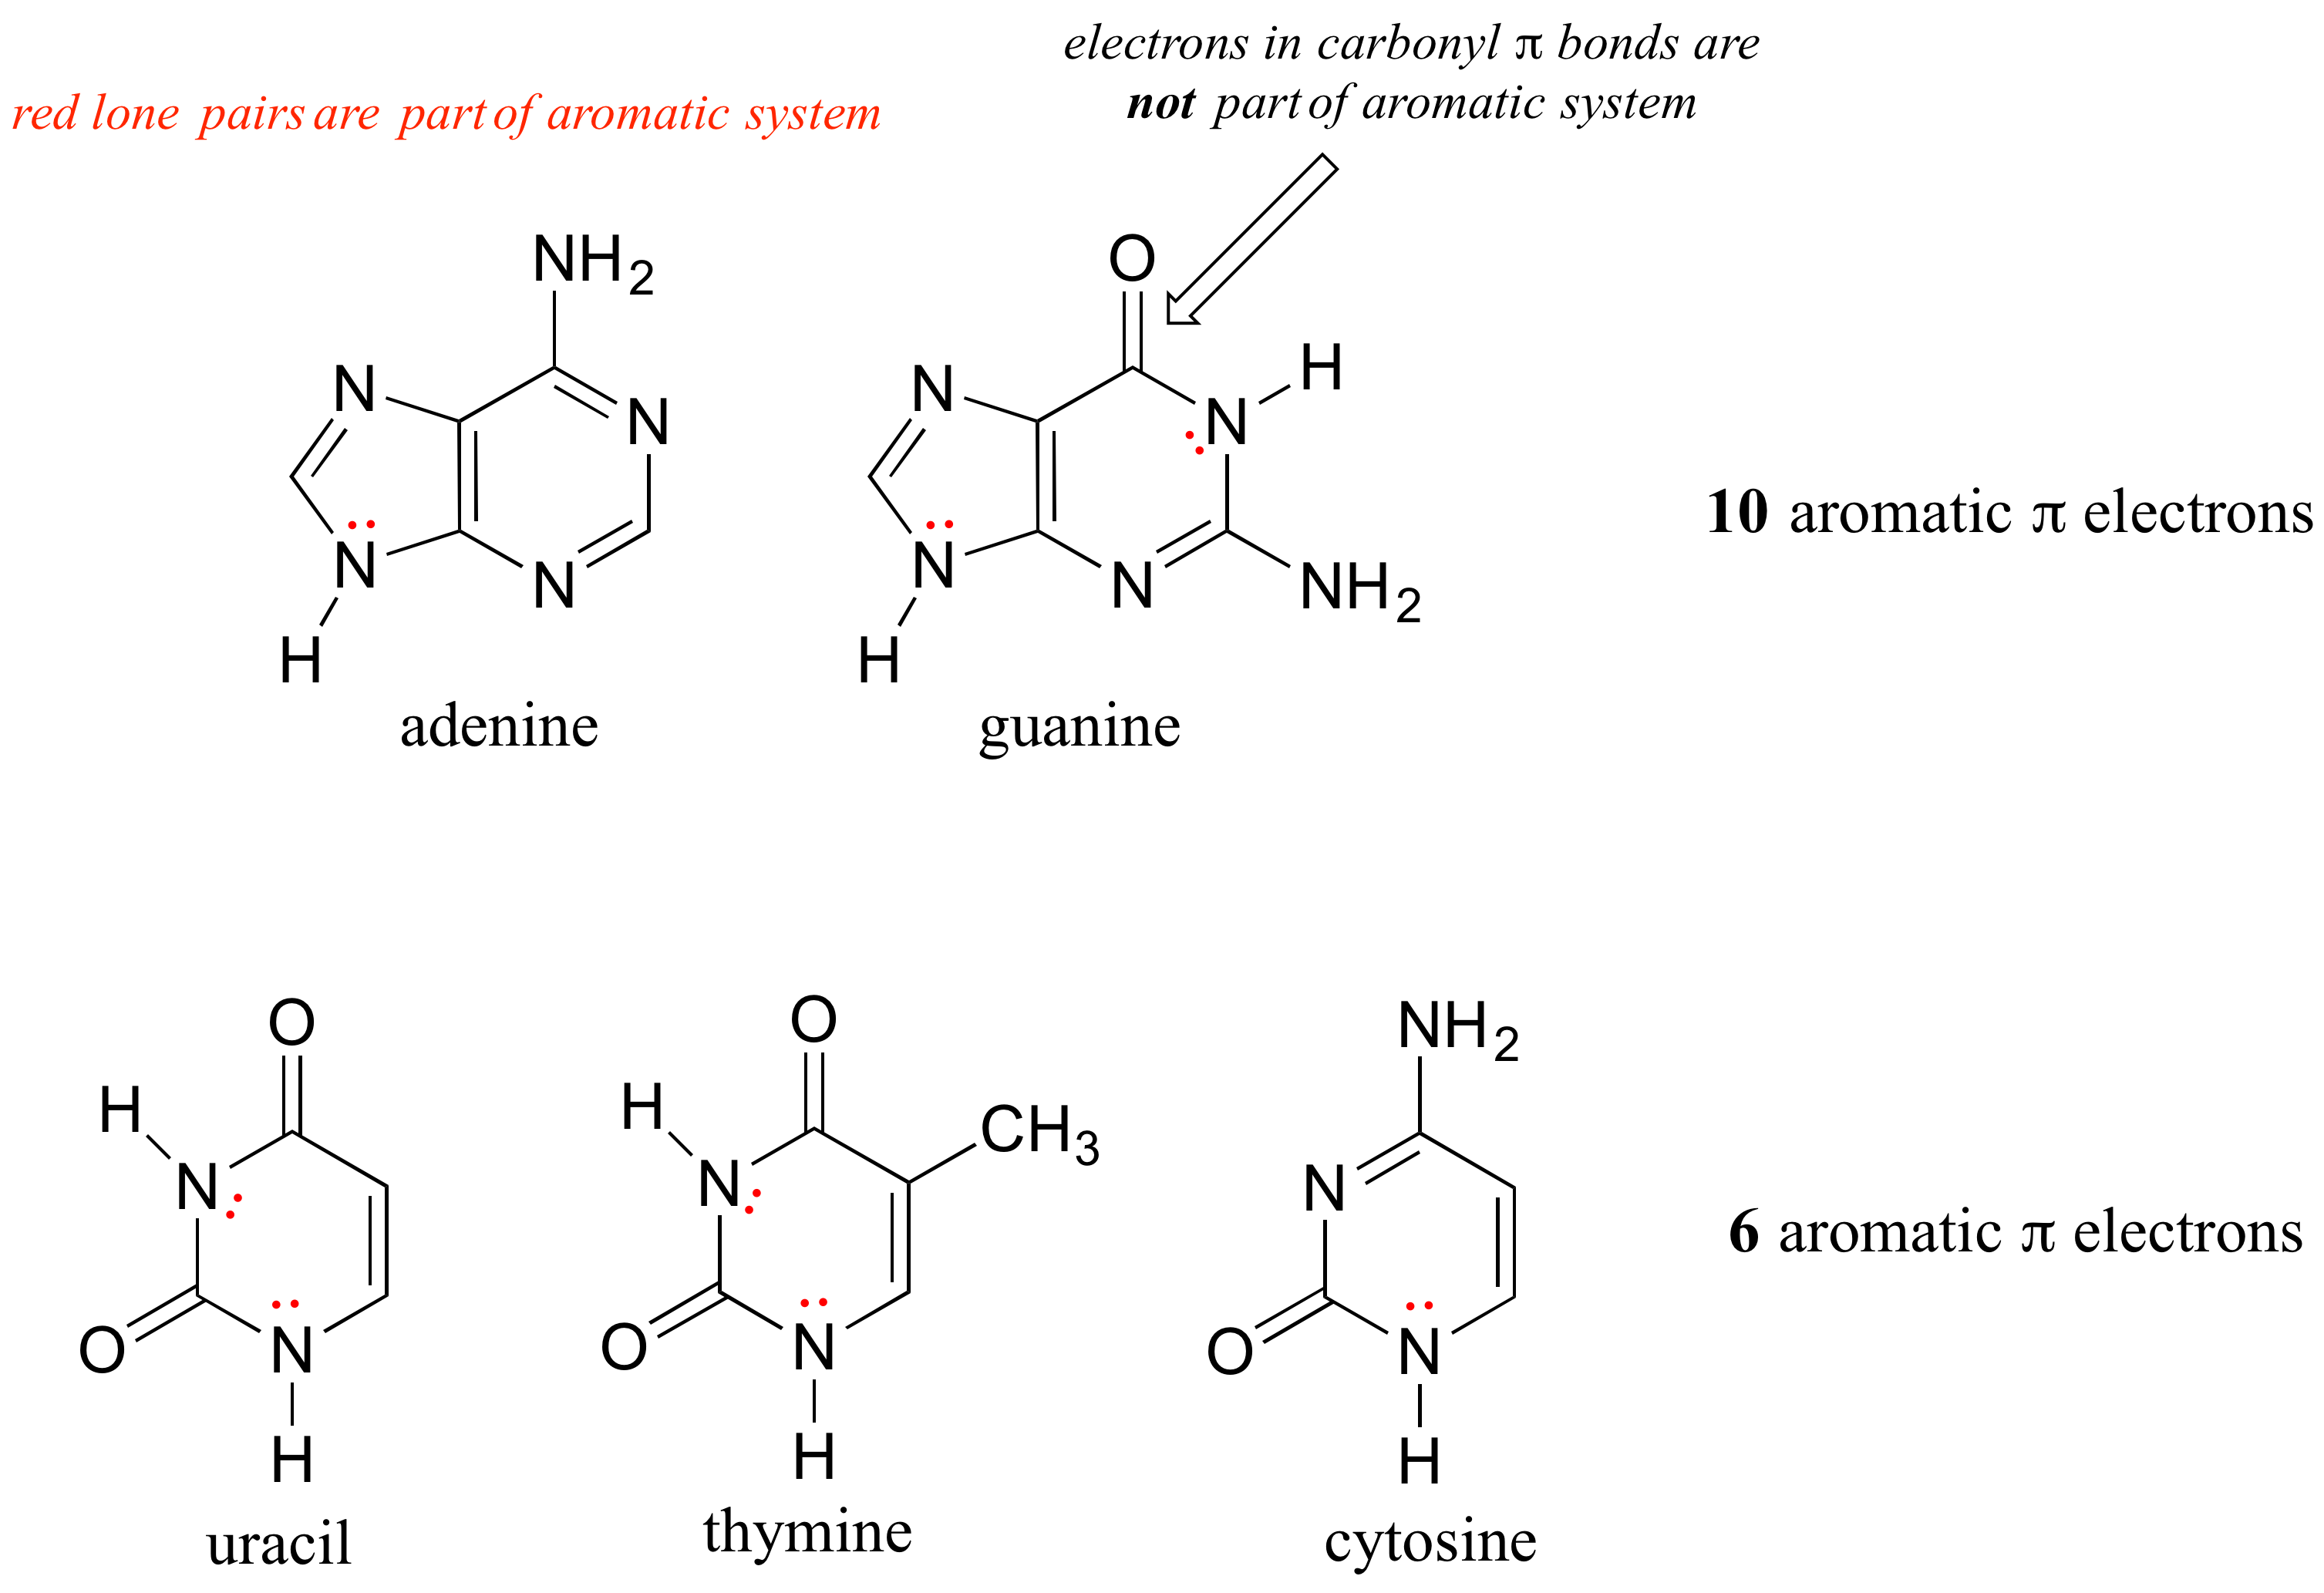 Adenine and guanine have 10 aromatic pi electrons. Uracil, thymine, and cytosine have six aromatic pi electrons. Electrons in carbonyl pi bonds are not part of the aromatic system. 